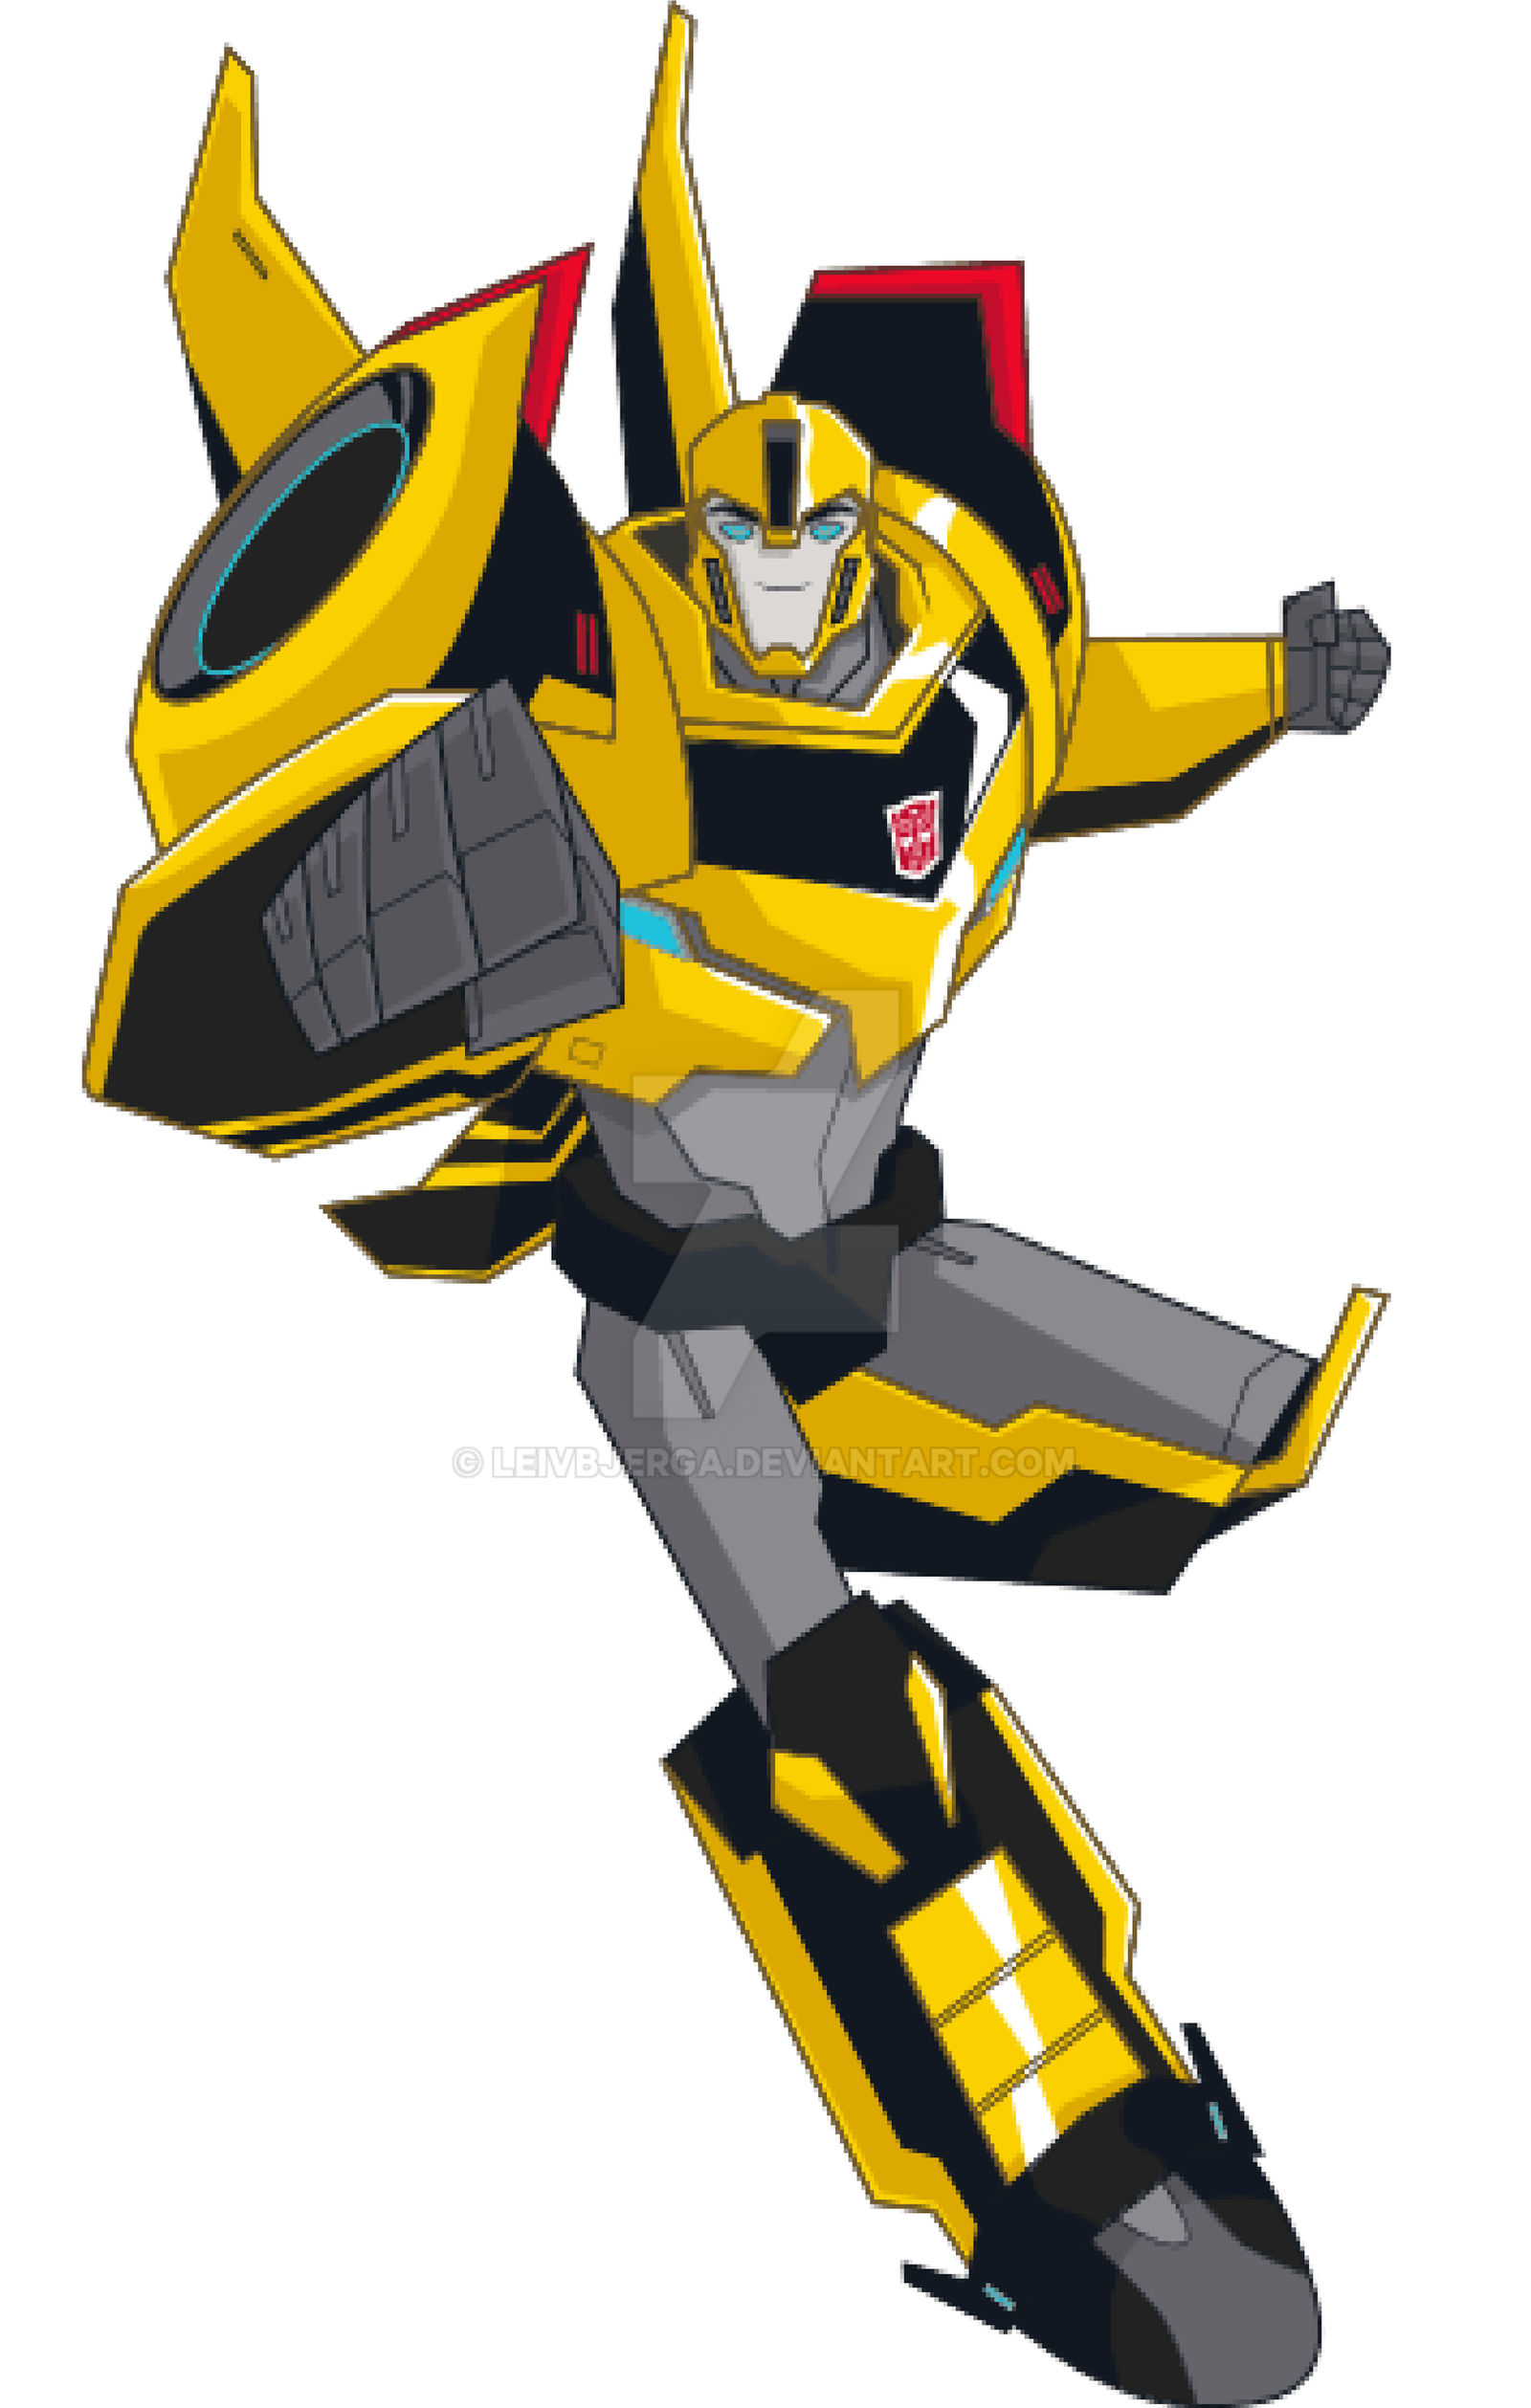 Transformers Animated Films Bumblebee by leivbjerga on DeviantArt